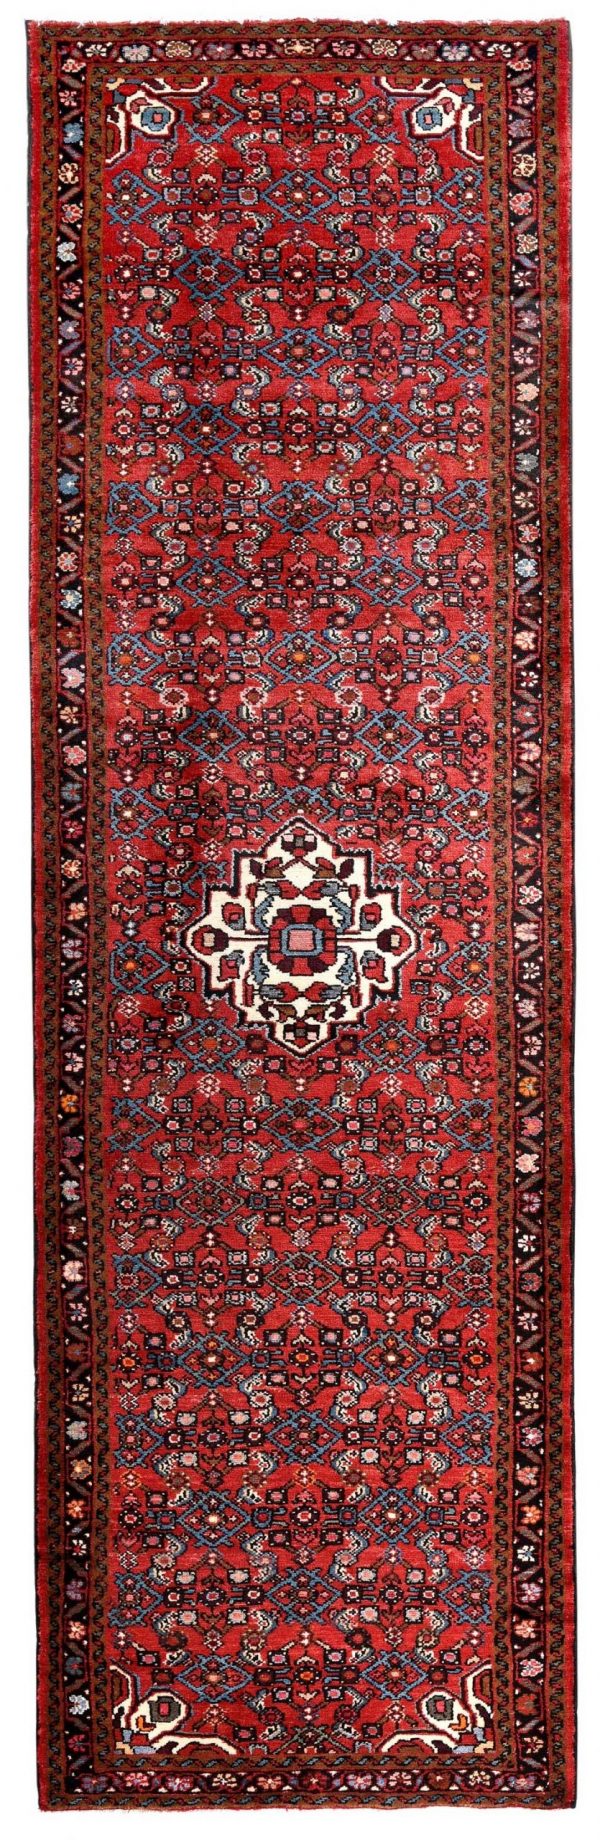 Hand knotted Runner Persian Rug for sale DR-324-7266